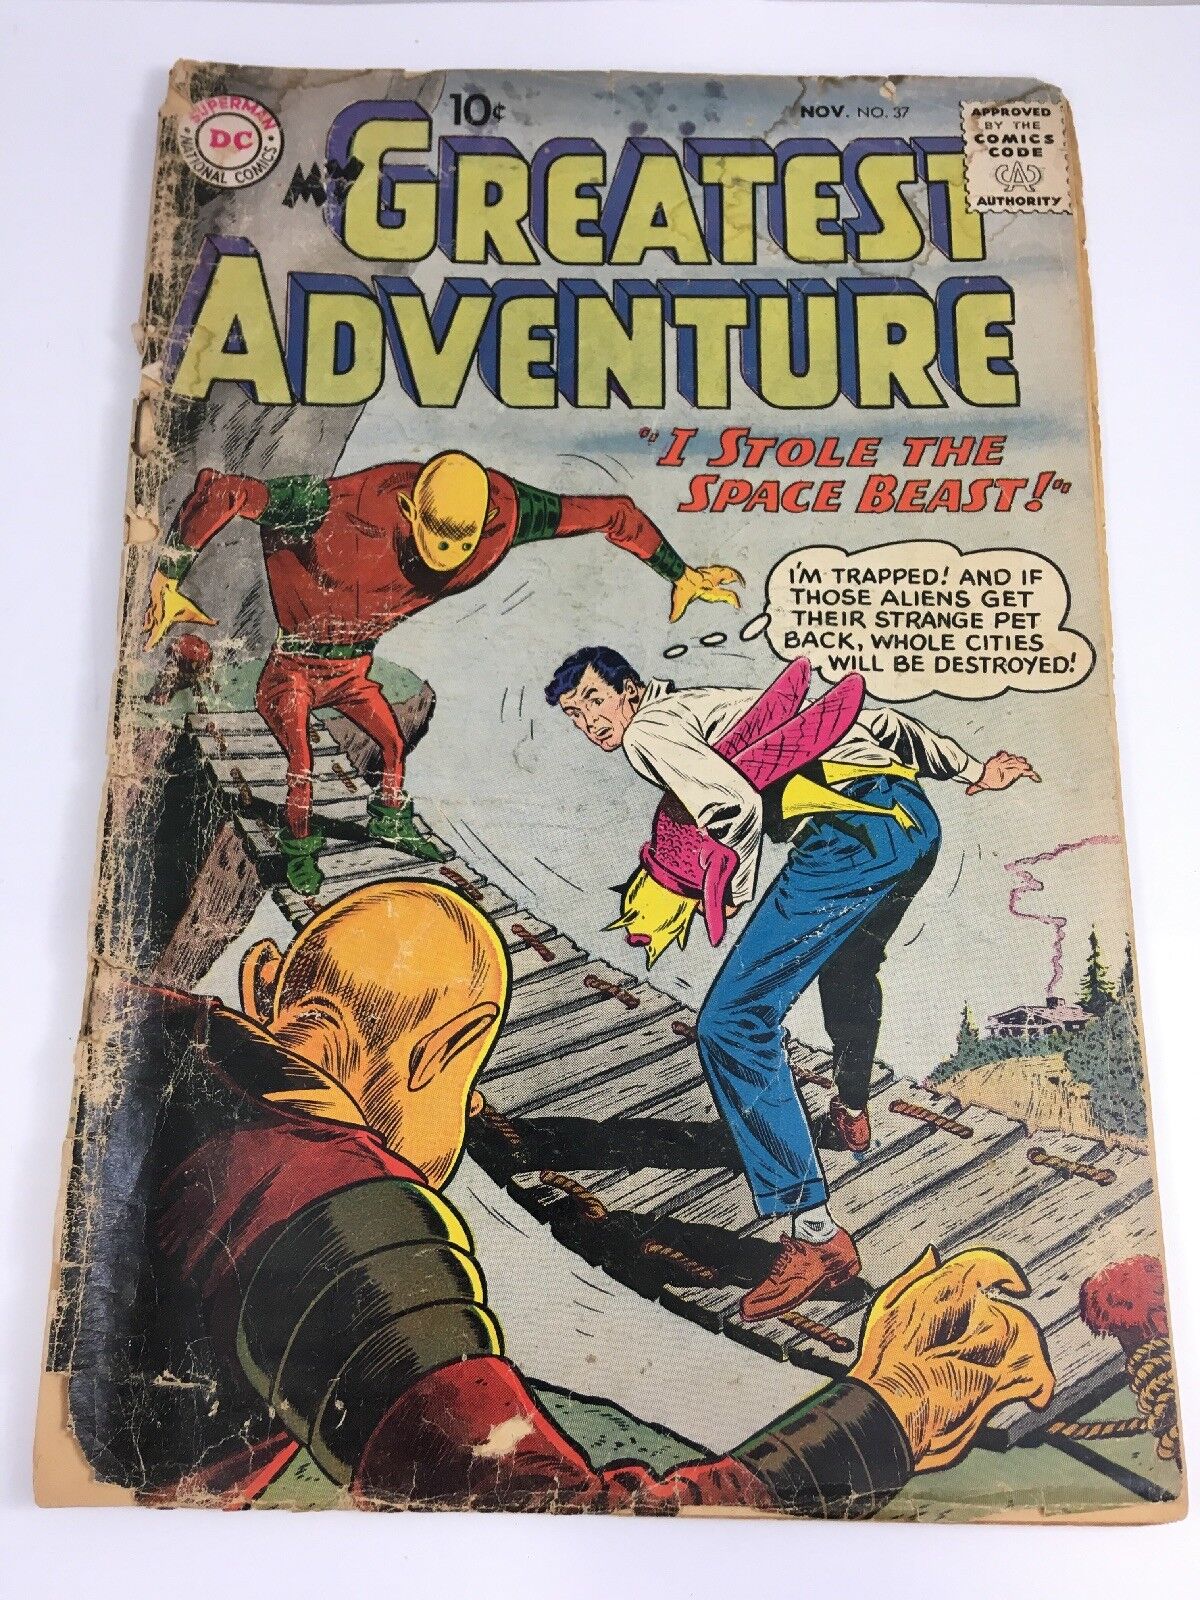 My Greatest Adventure #37 DC Comics November 1959 I stole the Space Beast Low Gr